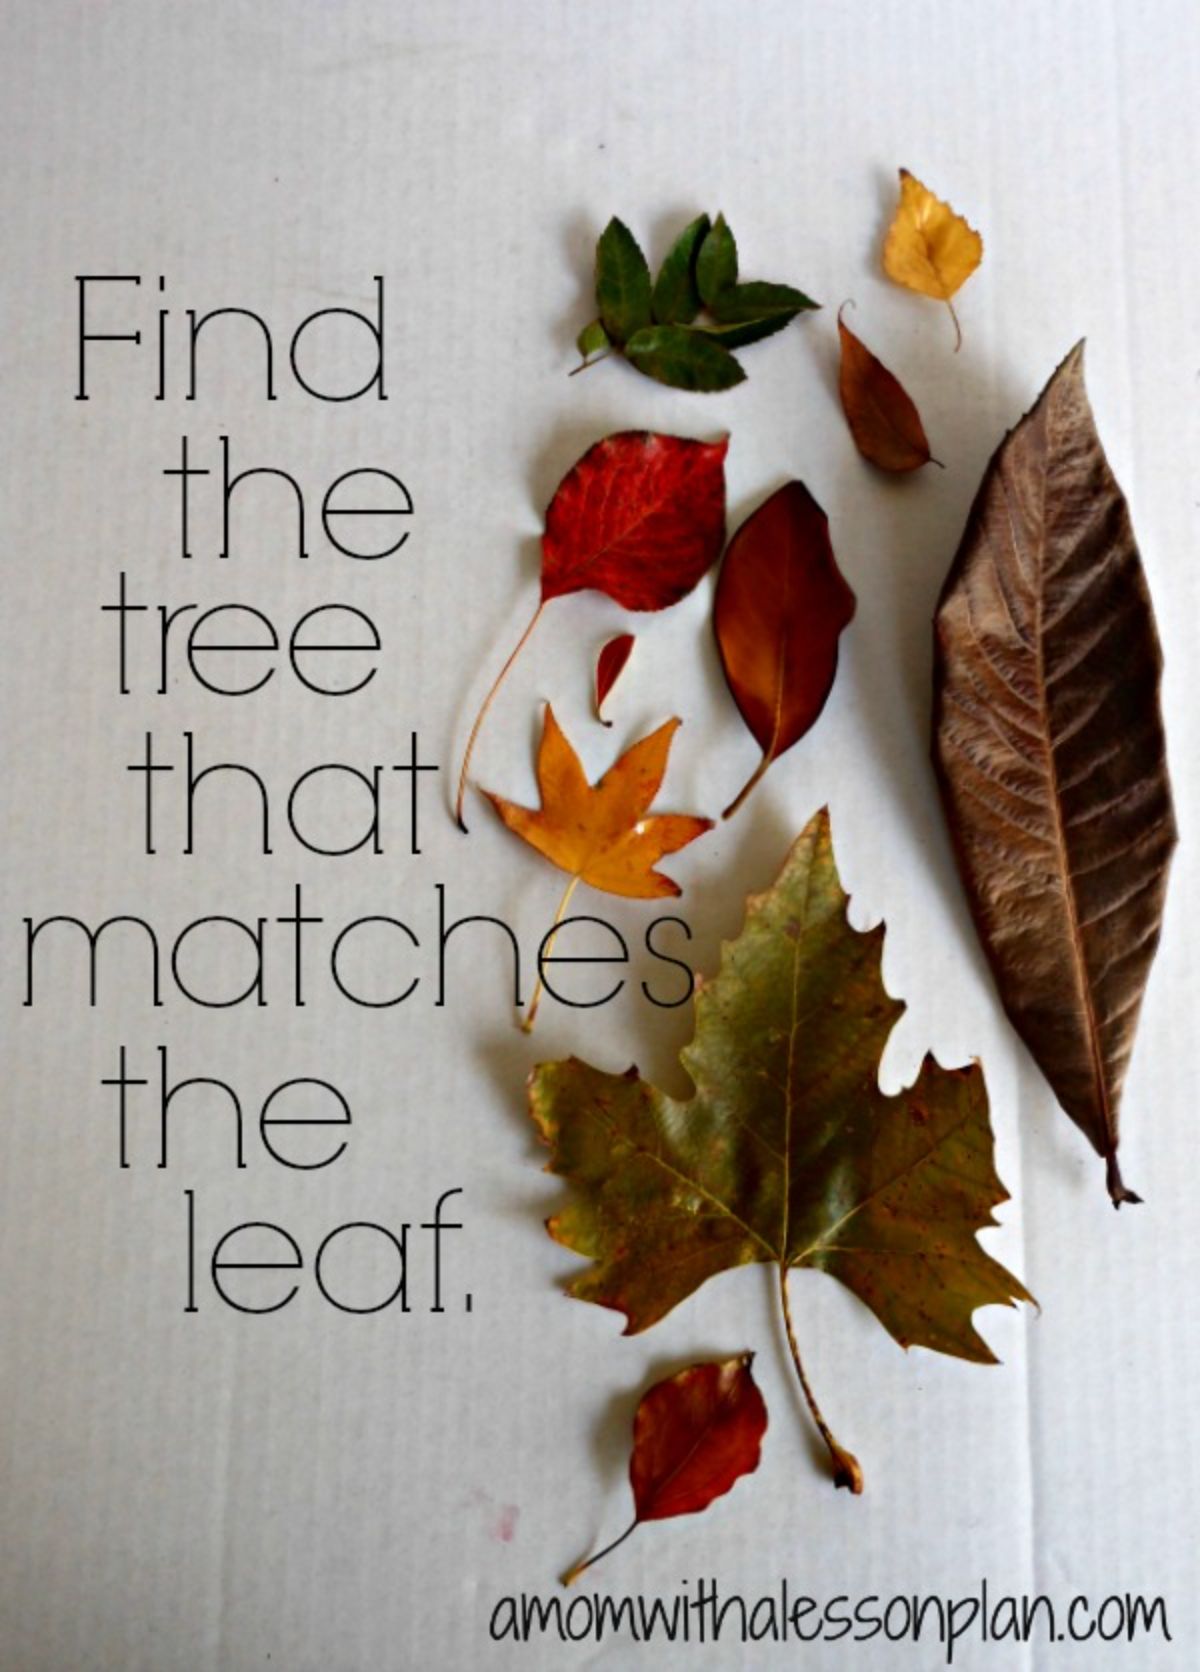 the text reads "find the tree that matches the leaf" the image is of a group of different leaves